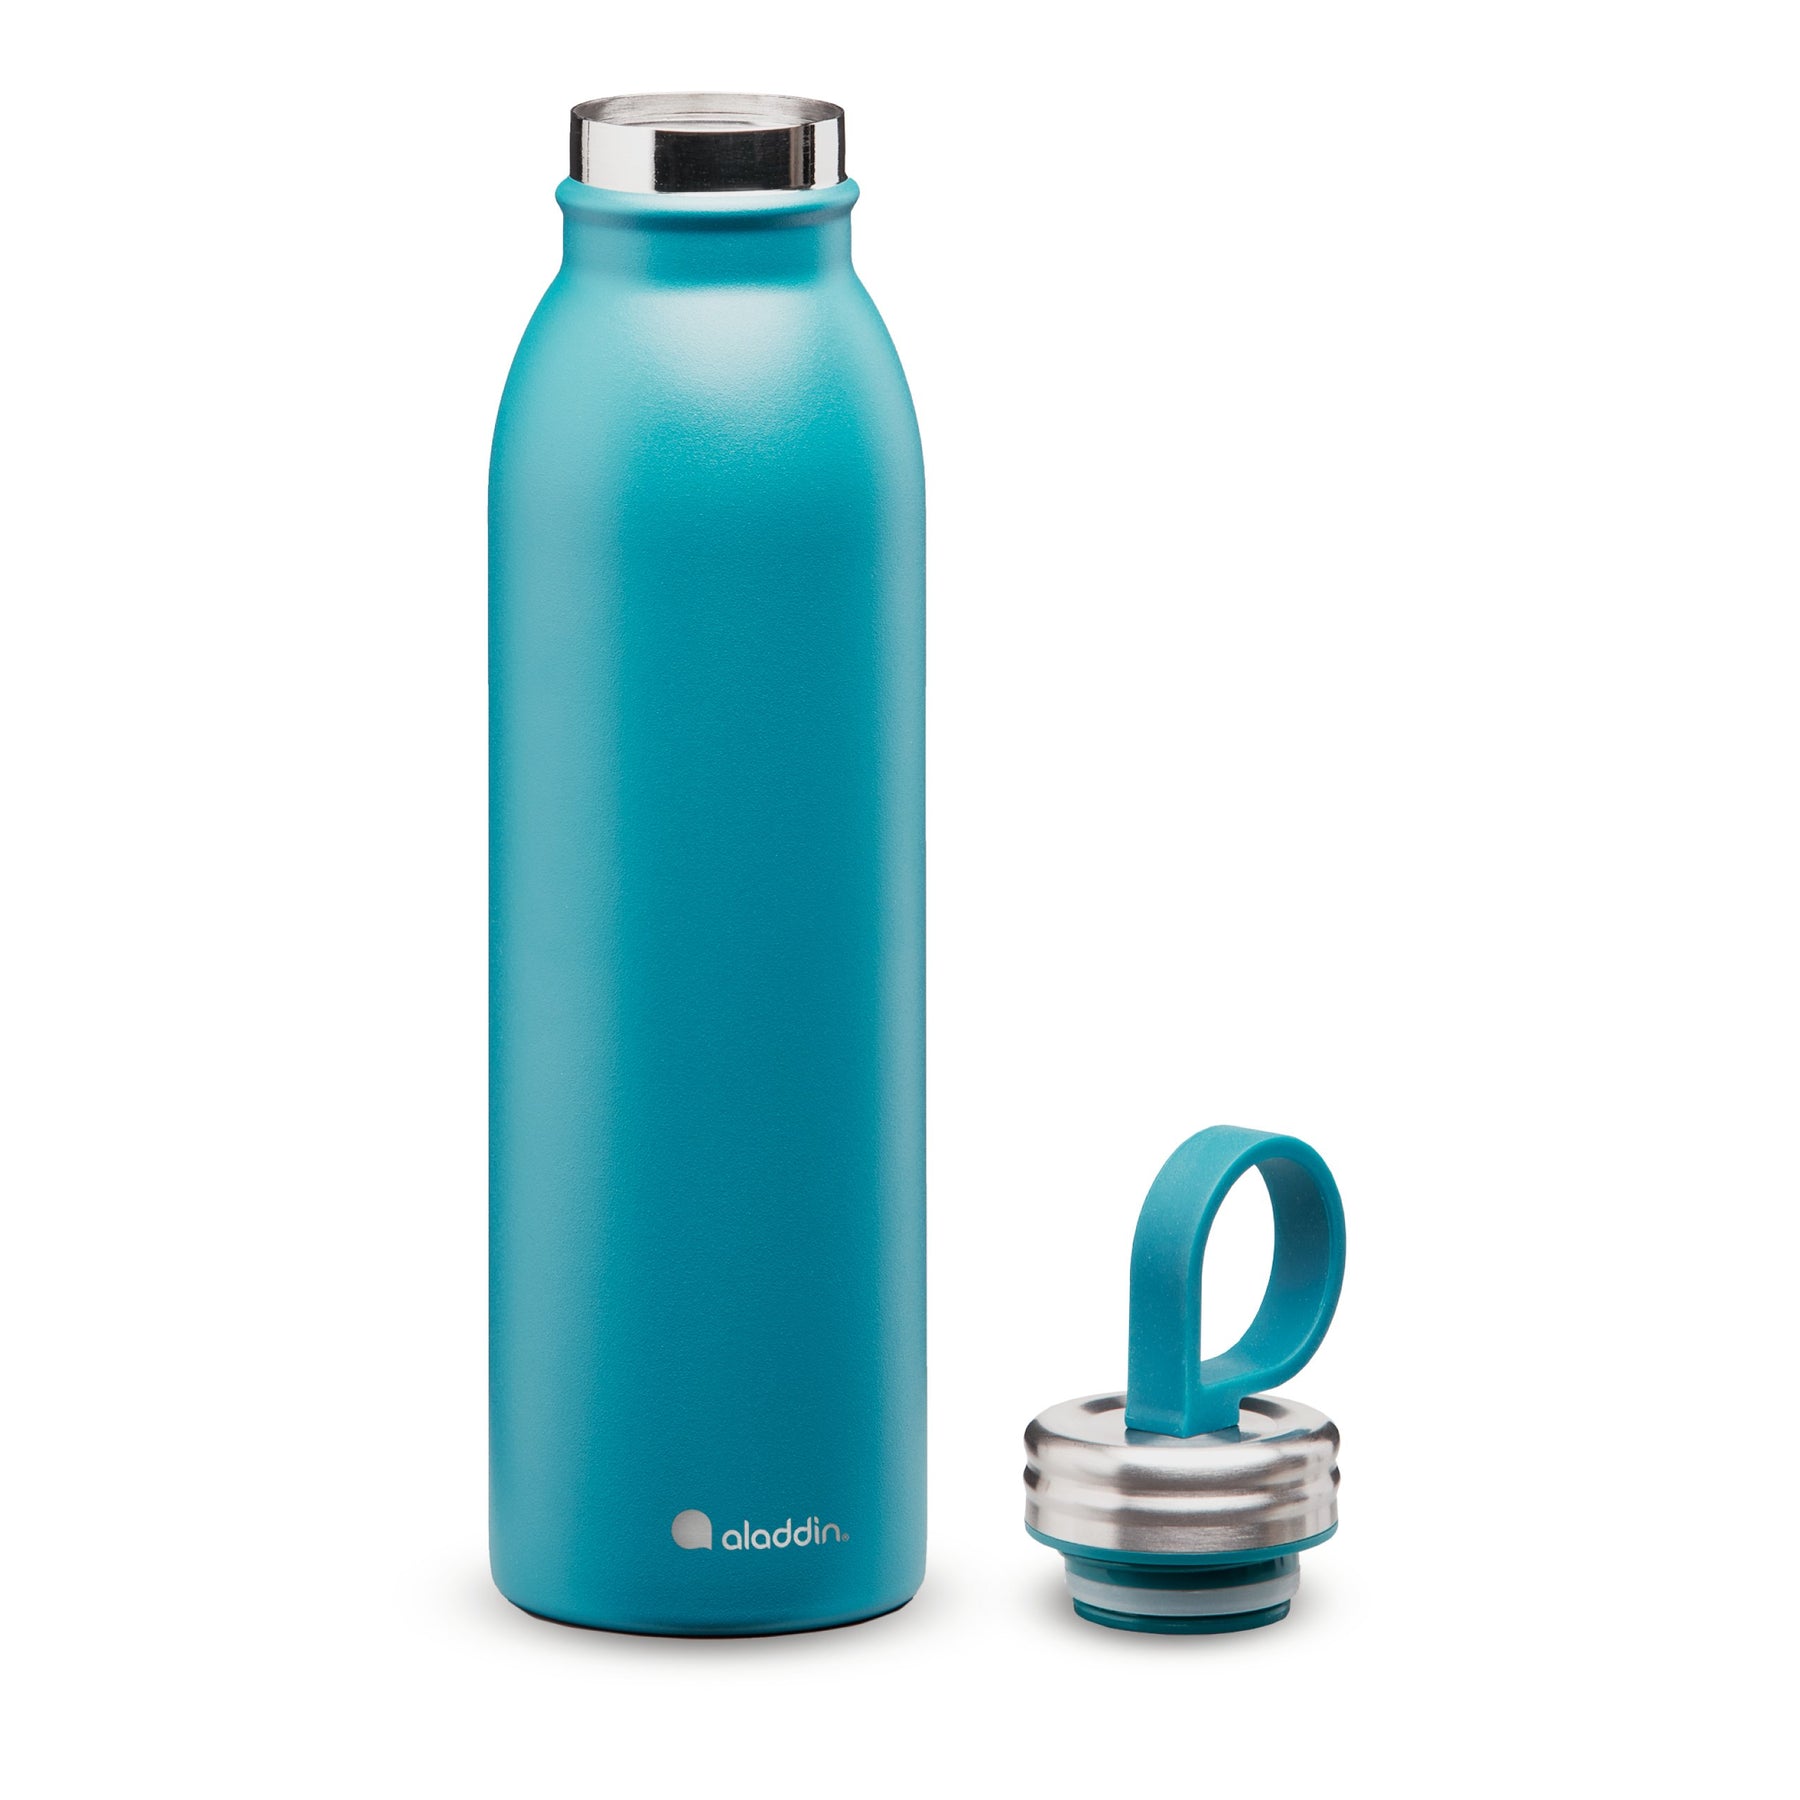 Aladdin-Chilled-Thermavac_-Colour-Stainless-Steel-Water-Bottle-0.55L-Aqua-Blue-10-09425-004-Exploded_1800x1800